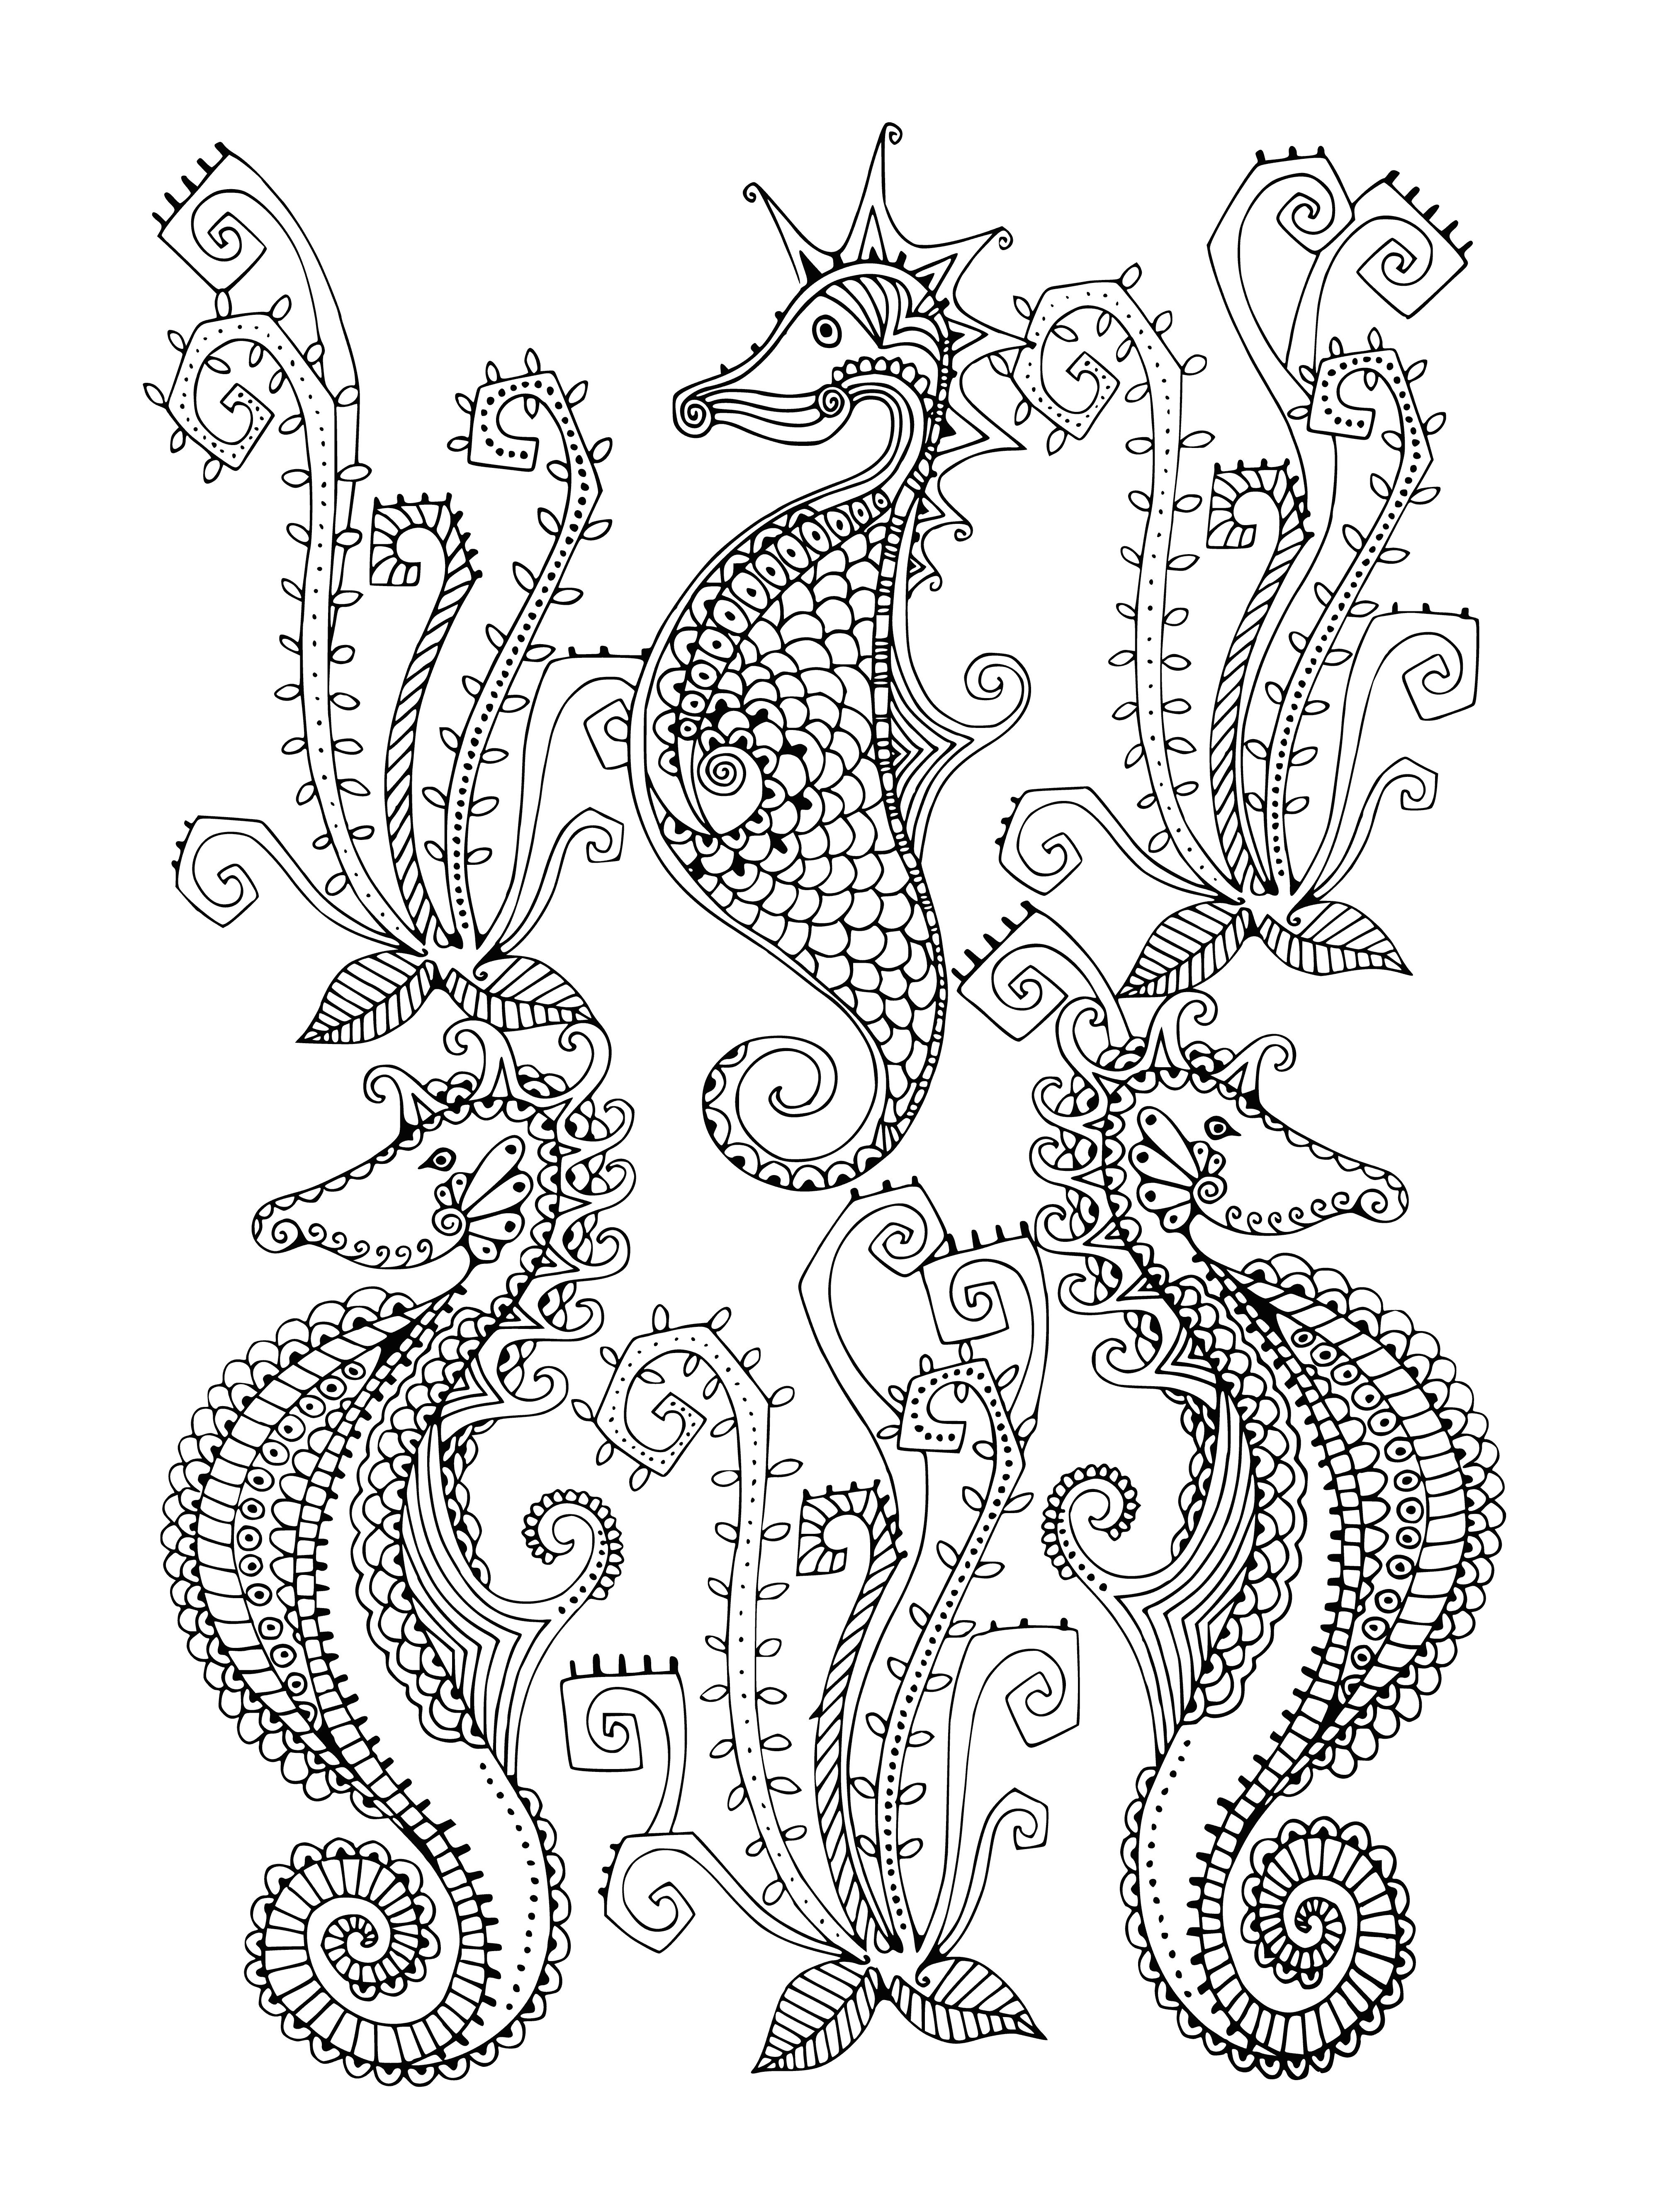 coloring page: Horses swim through the ocean, surrounded by coral & seaweed, with the sun shining down on their long tails. Fish swim among the plants.